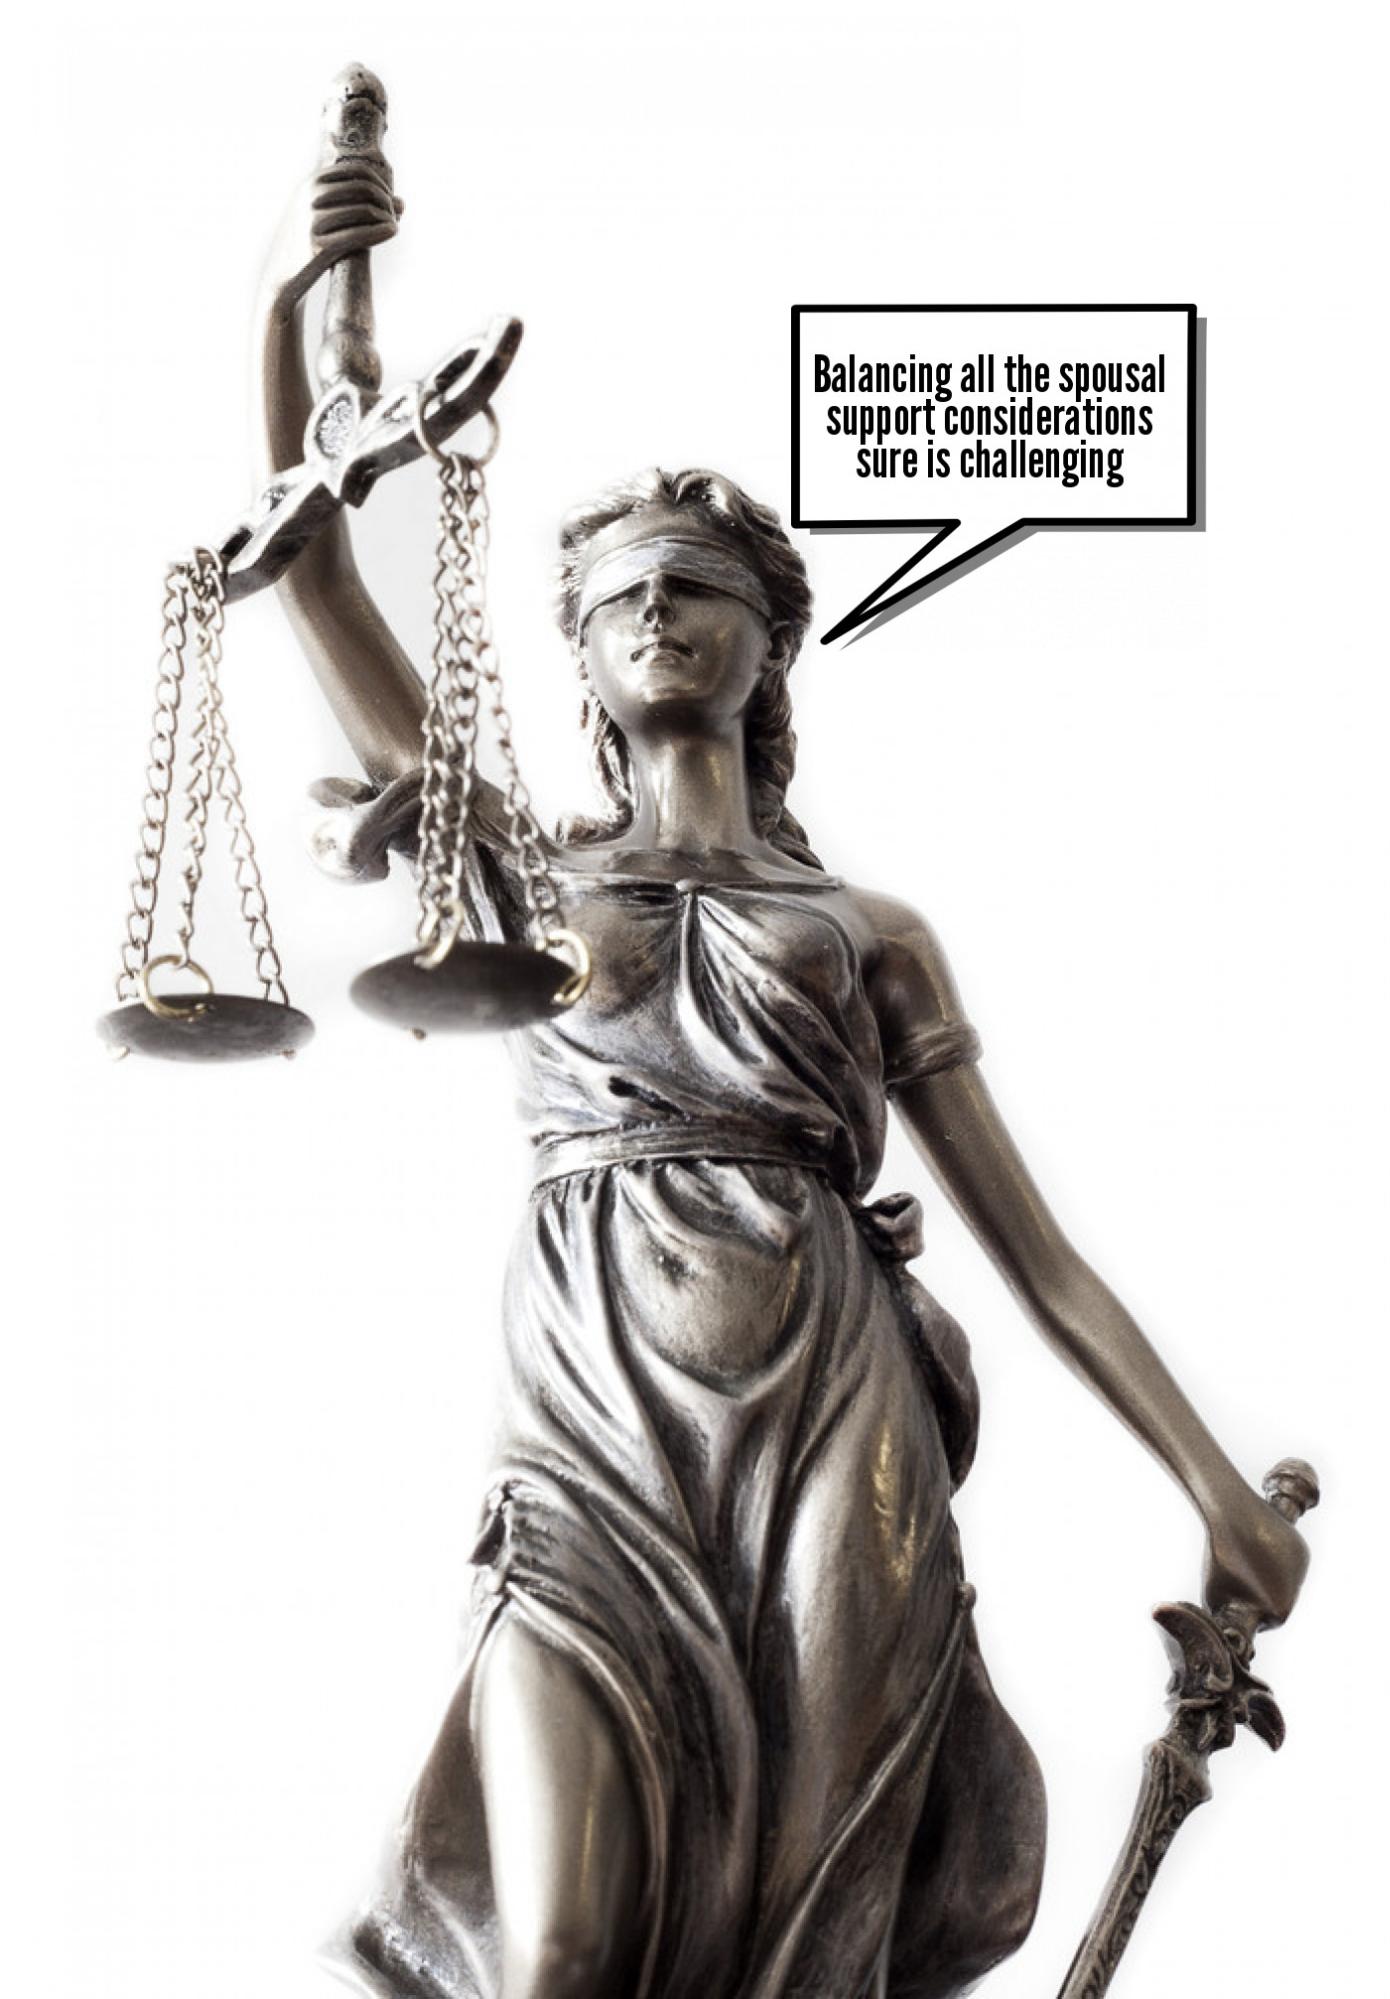 A statue of justice holding scales and a speech bubble.